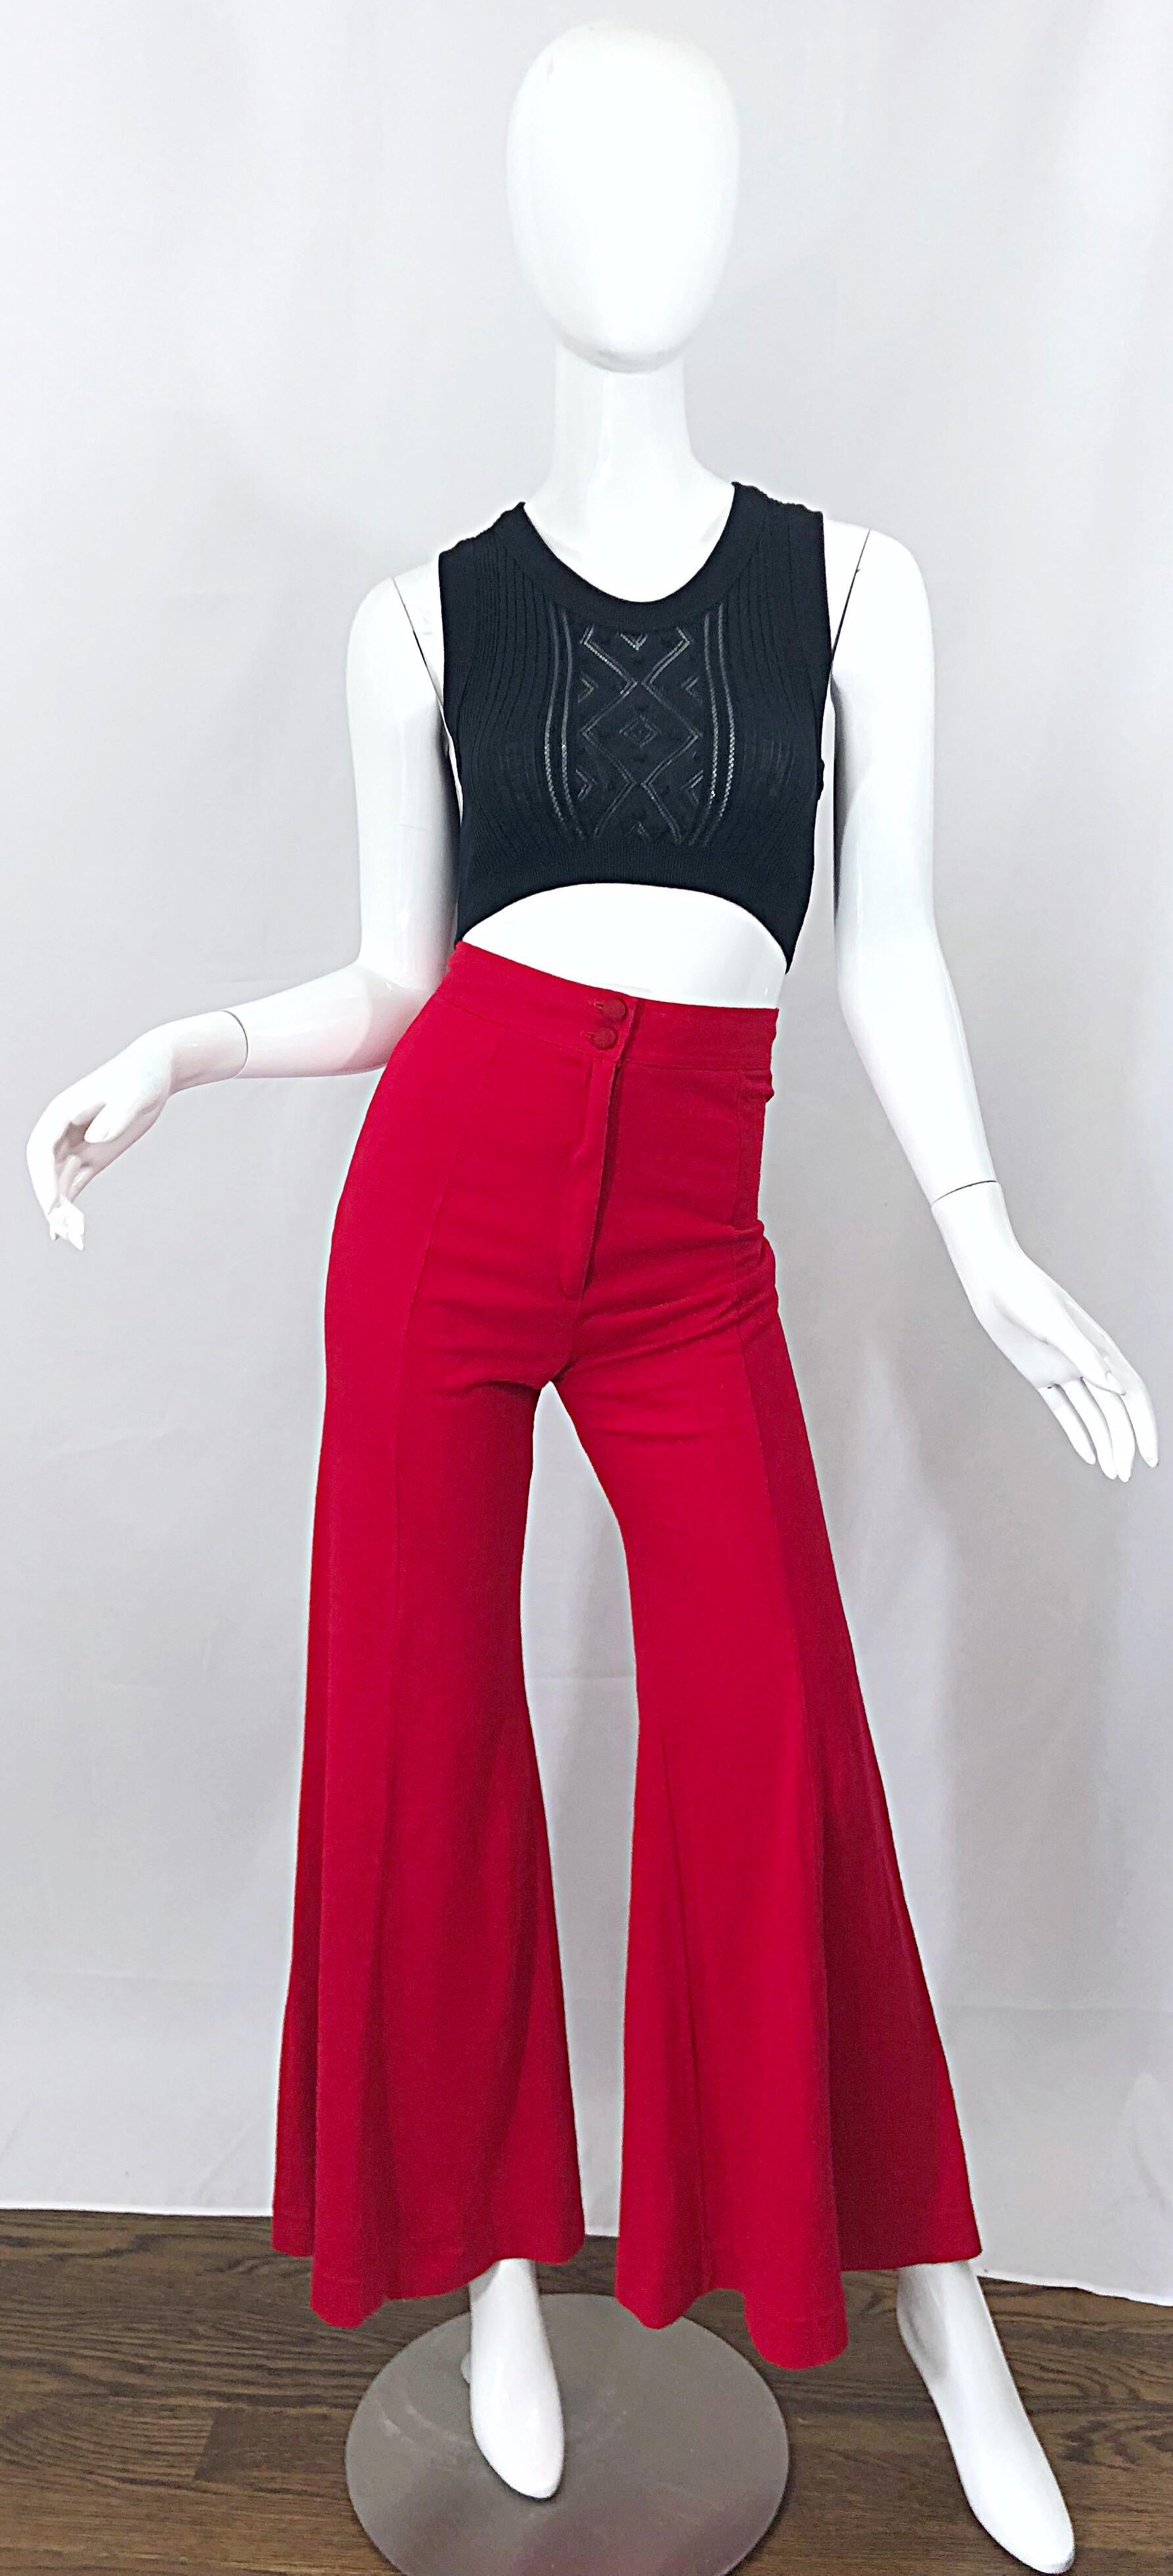 Ultra rare and collectible 70s ALLEY CAT, by BETSEY JOHNSON lipstick red high waisted flared leg bell bottoms! From one of Johnson's first labels, these rare pants are for the musuems! Flattering high waisted fit with two red fabric covered buttons